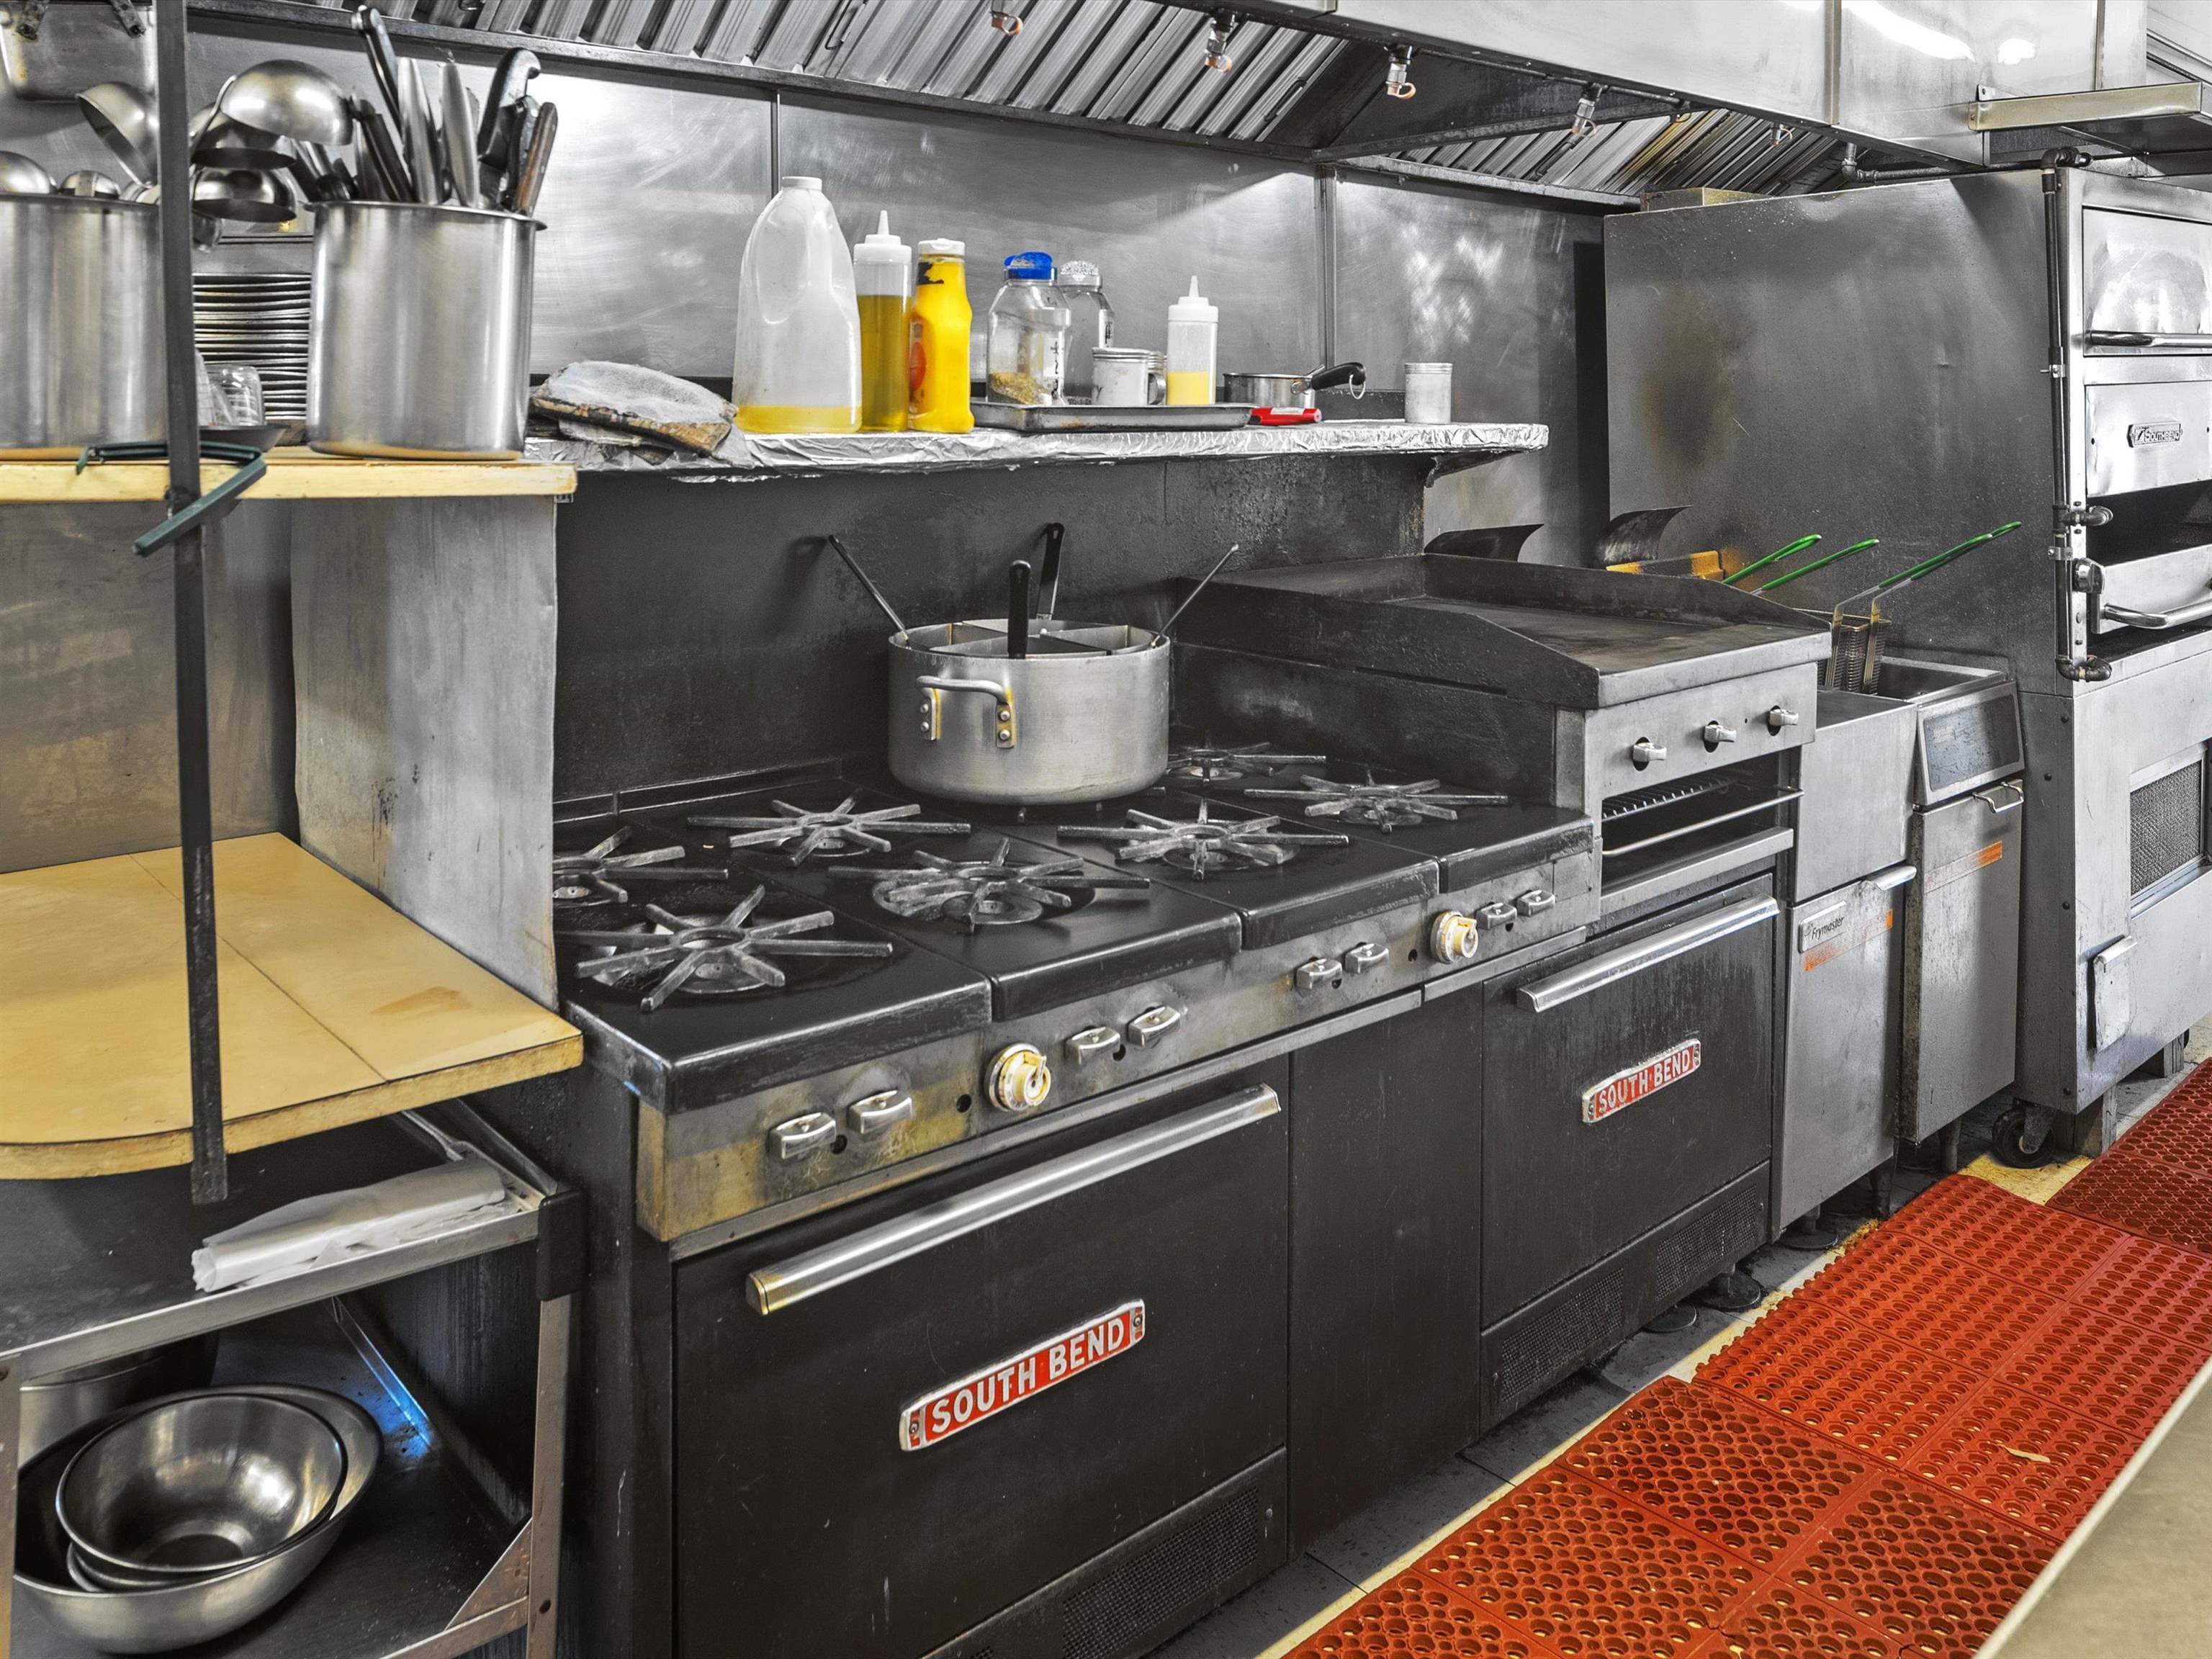 Equipment:  2 ovens, 8 burners, flat top grill, boiler, stand alone & walk in freezers & coolers